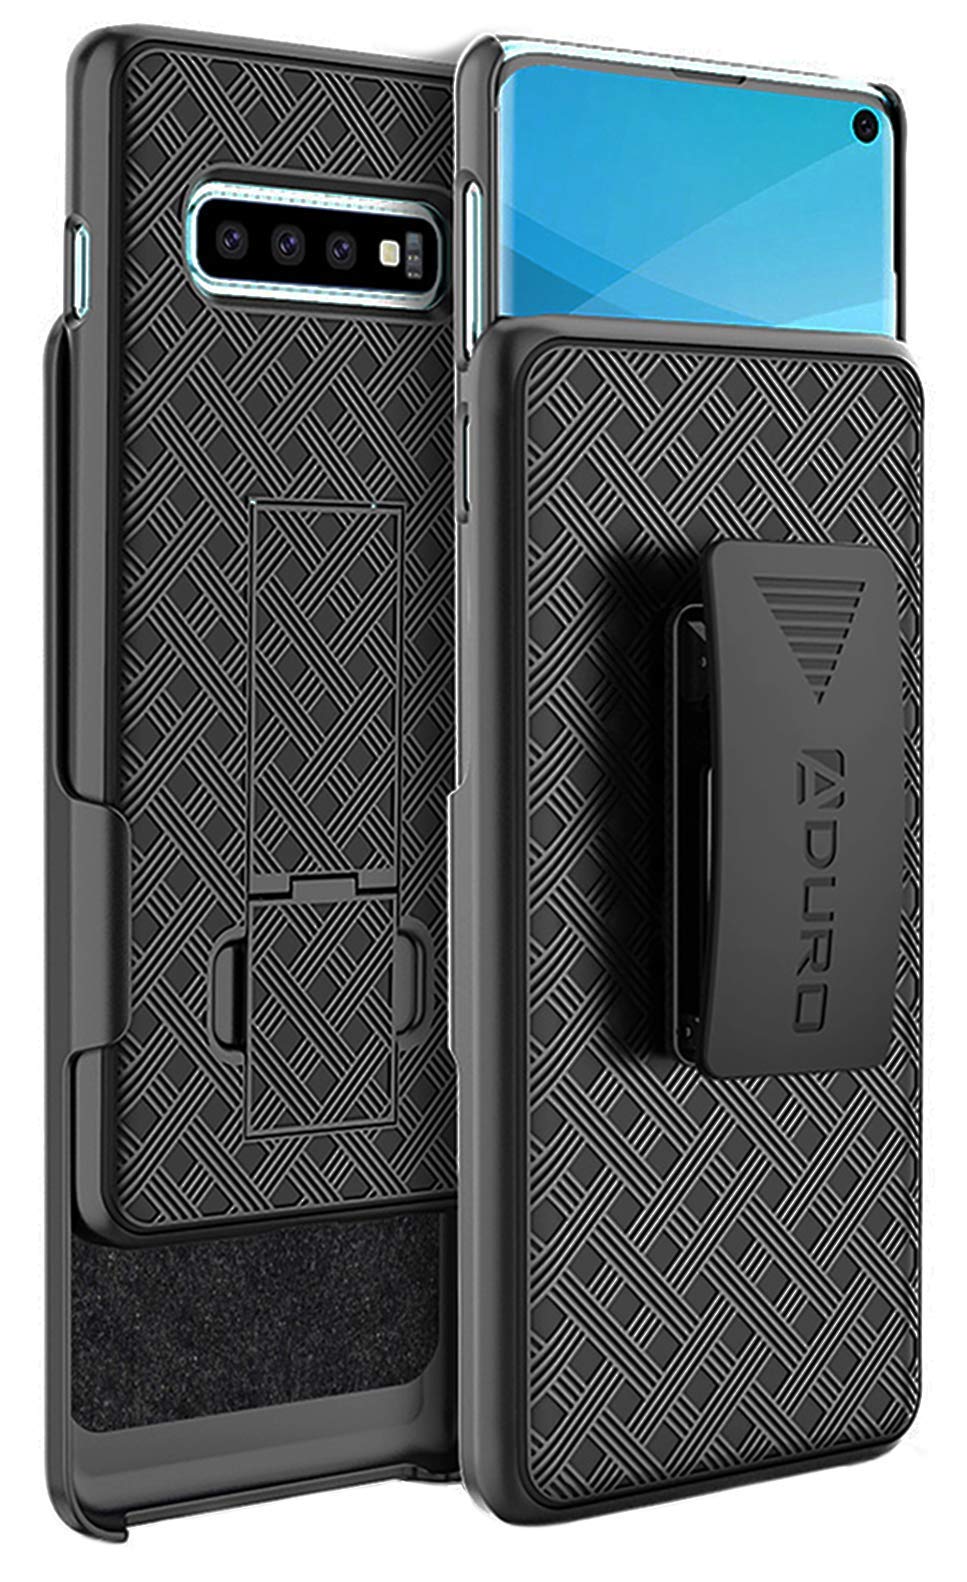 Aduro Cell Phone Holsters for Samsung Galaxy S10 Case Protector Includes Belt-Clip & Built-in Kickstand